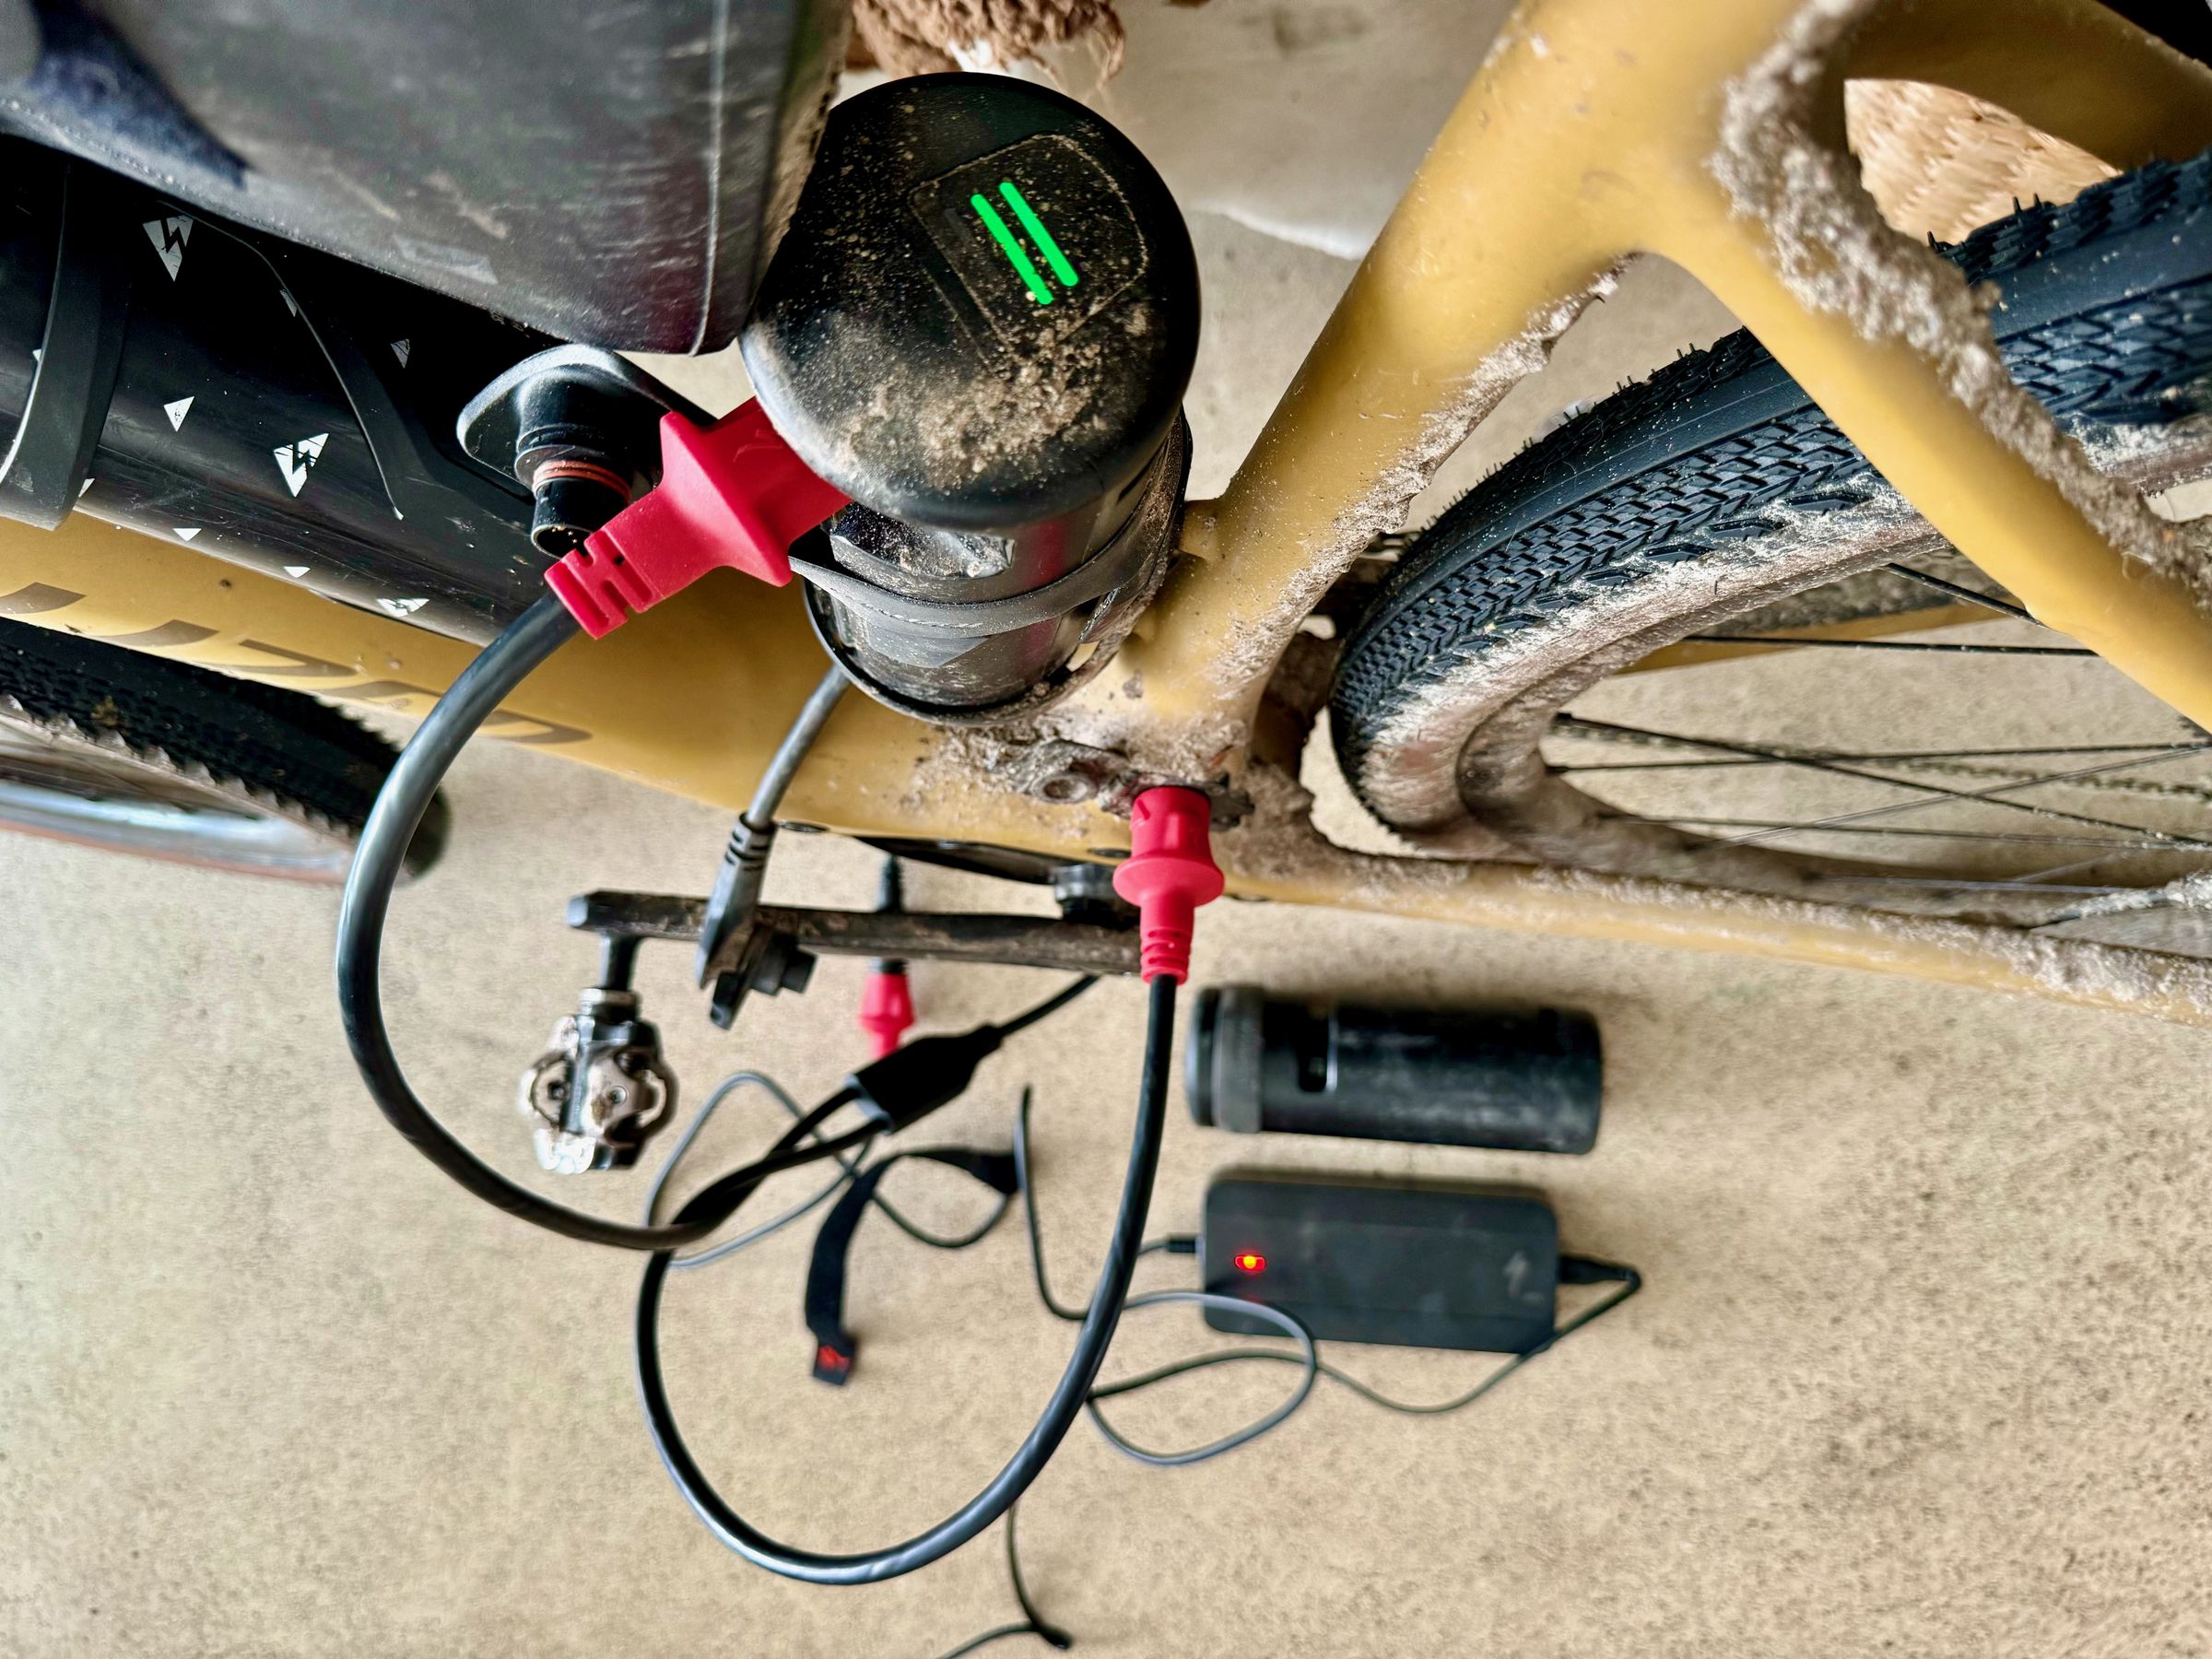 <em>Specialized’s Y-Cable charging both the main battery and one range extender. On the floor you can see the charging brick next to second range extender.</em>